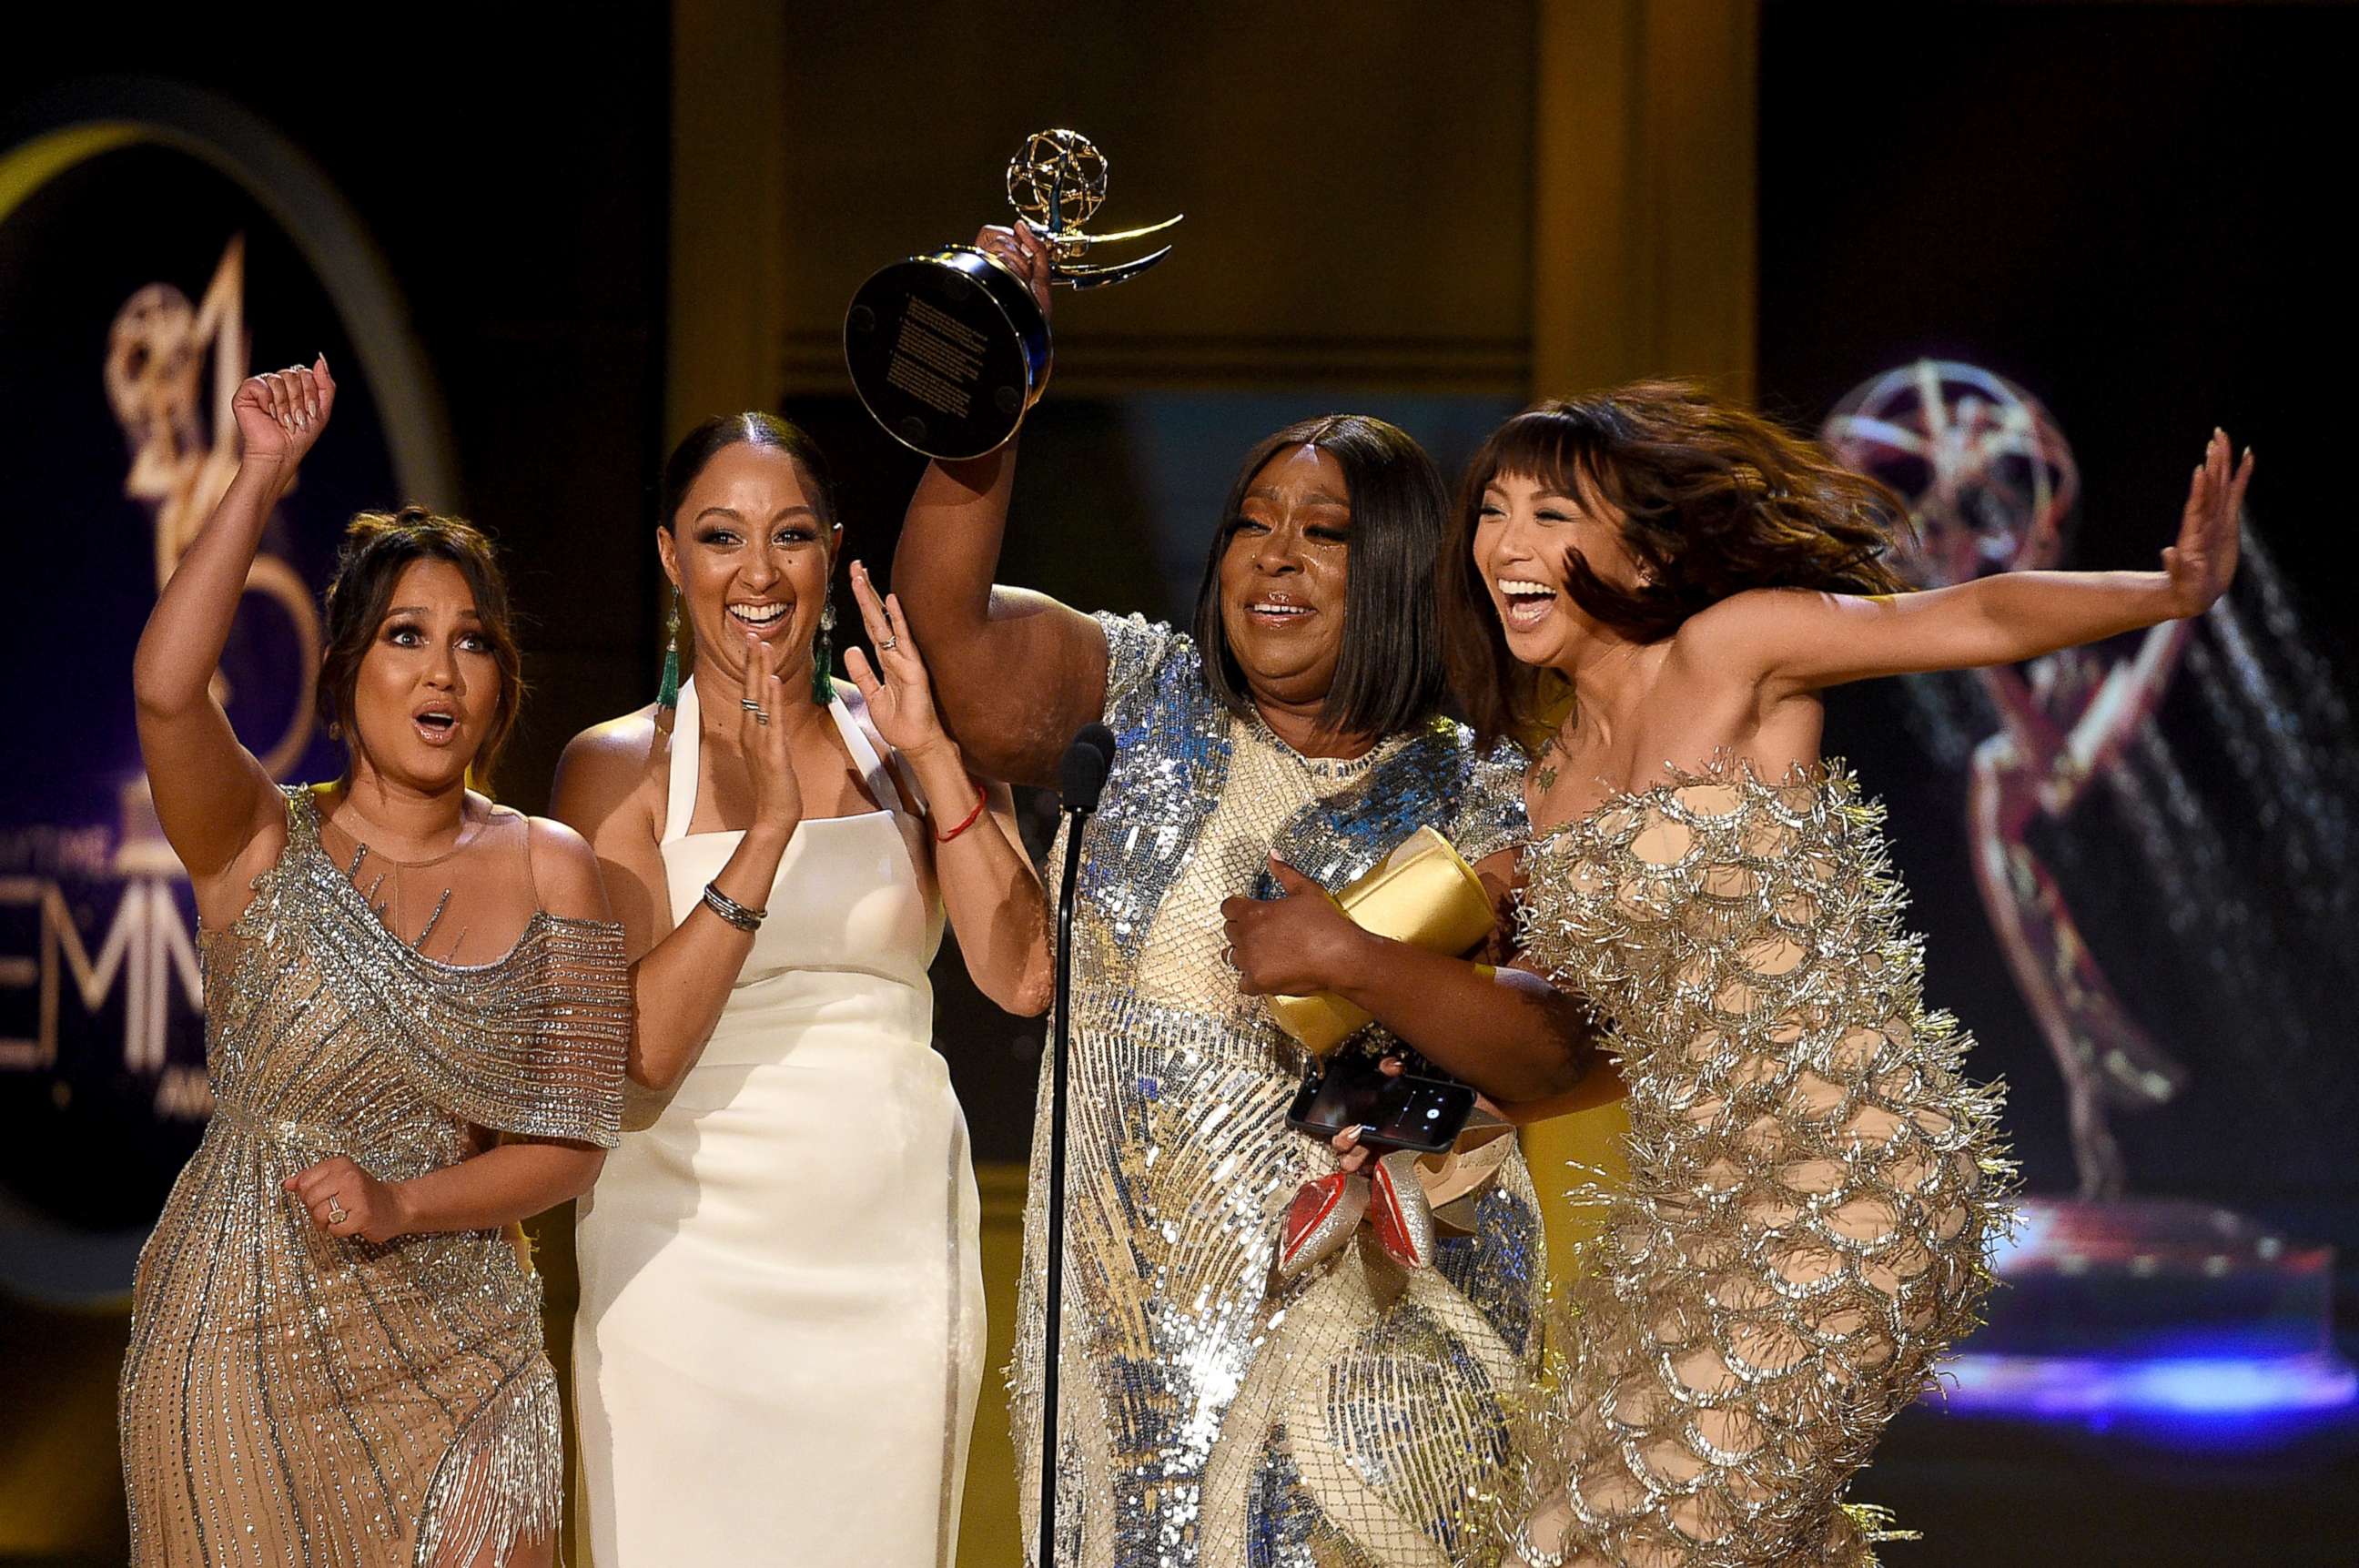 PHOTO: Adrienne Bailon, Tamera Mowry, Loni Love and Jeannie Mai, winners of Outstanding Entertainment Talk Show Host for 'The Real', onstage during the 45th annual Daytime Emmy Awards on April 29, 2018 in Pasadena, Calif.